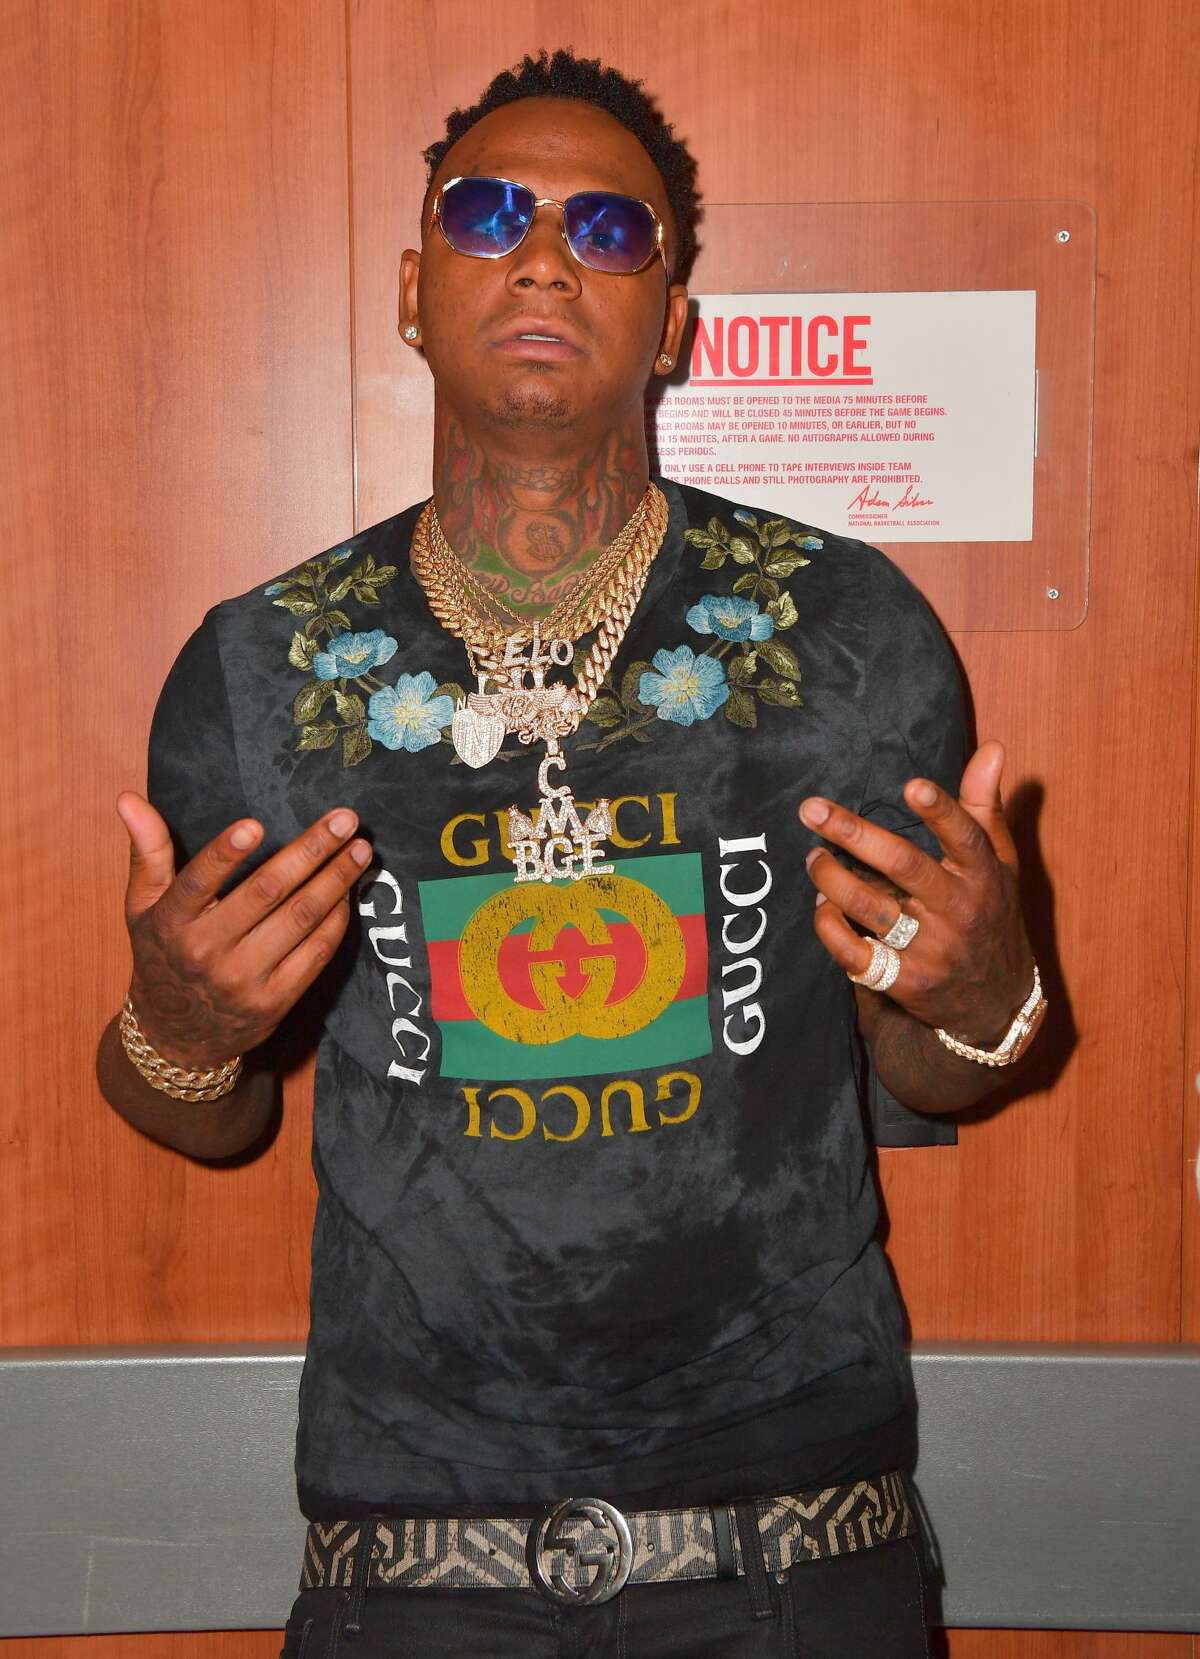 In a last-minute change, Moneybagg Yo will replace Rich the Kid as one of the Mala Luna performers. 